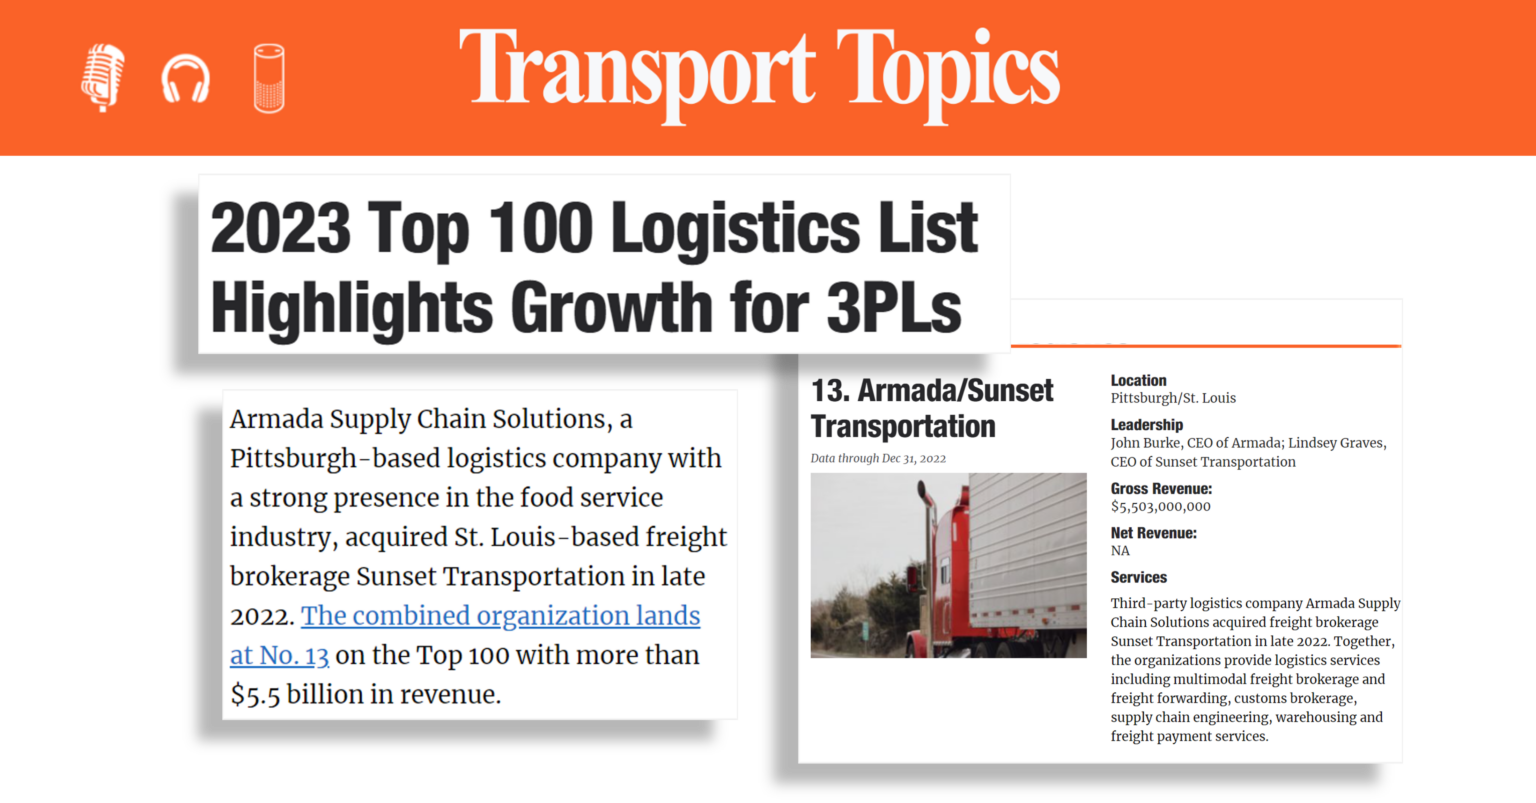 Armada/Sunset named 13 Top Logistics Company in 2023 by Transport